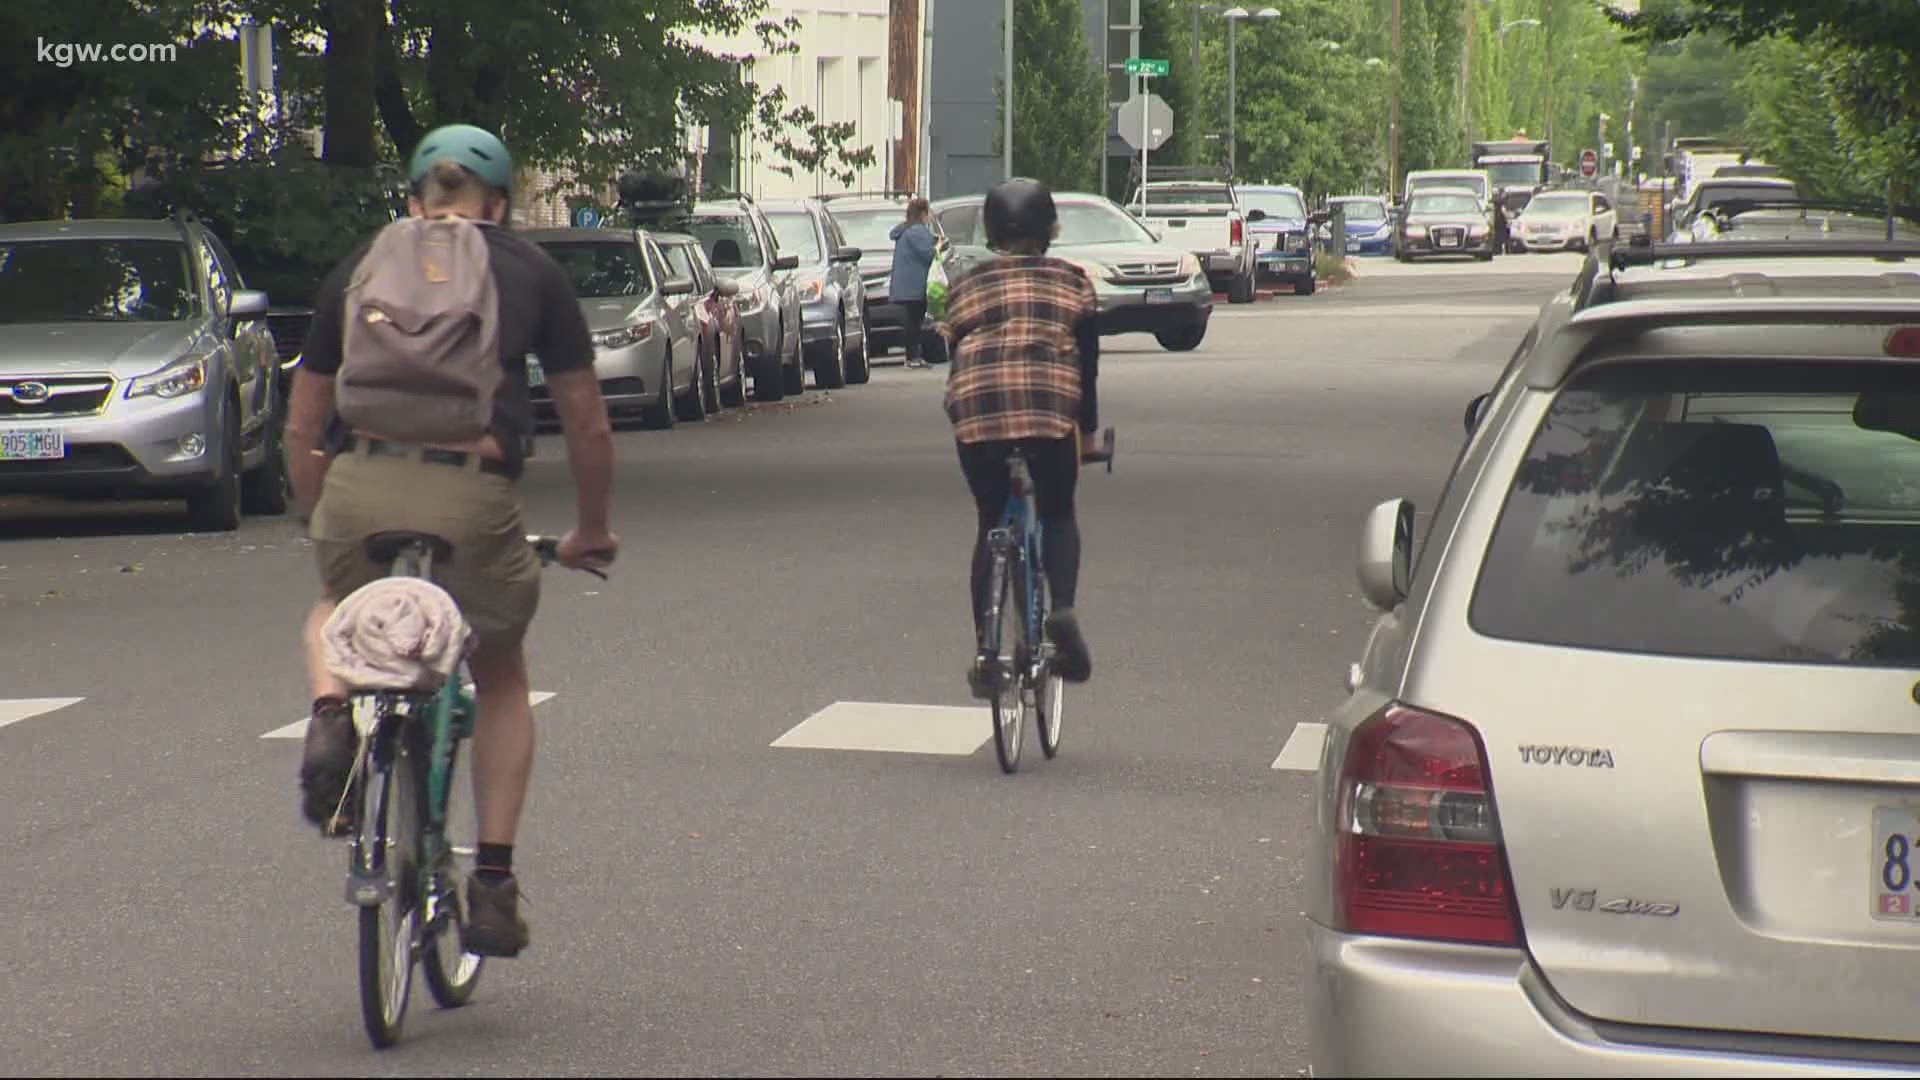 The city of Portland revealed new bike traffic plans. Keely Chalmers reports.